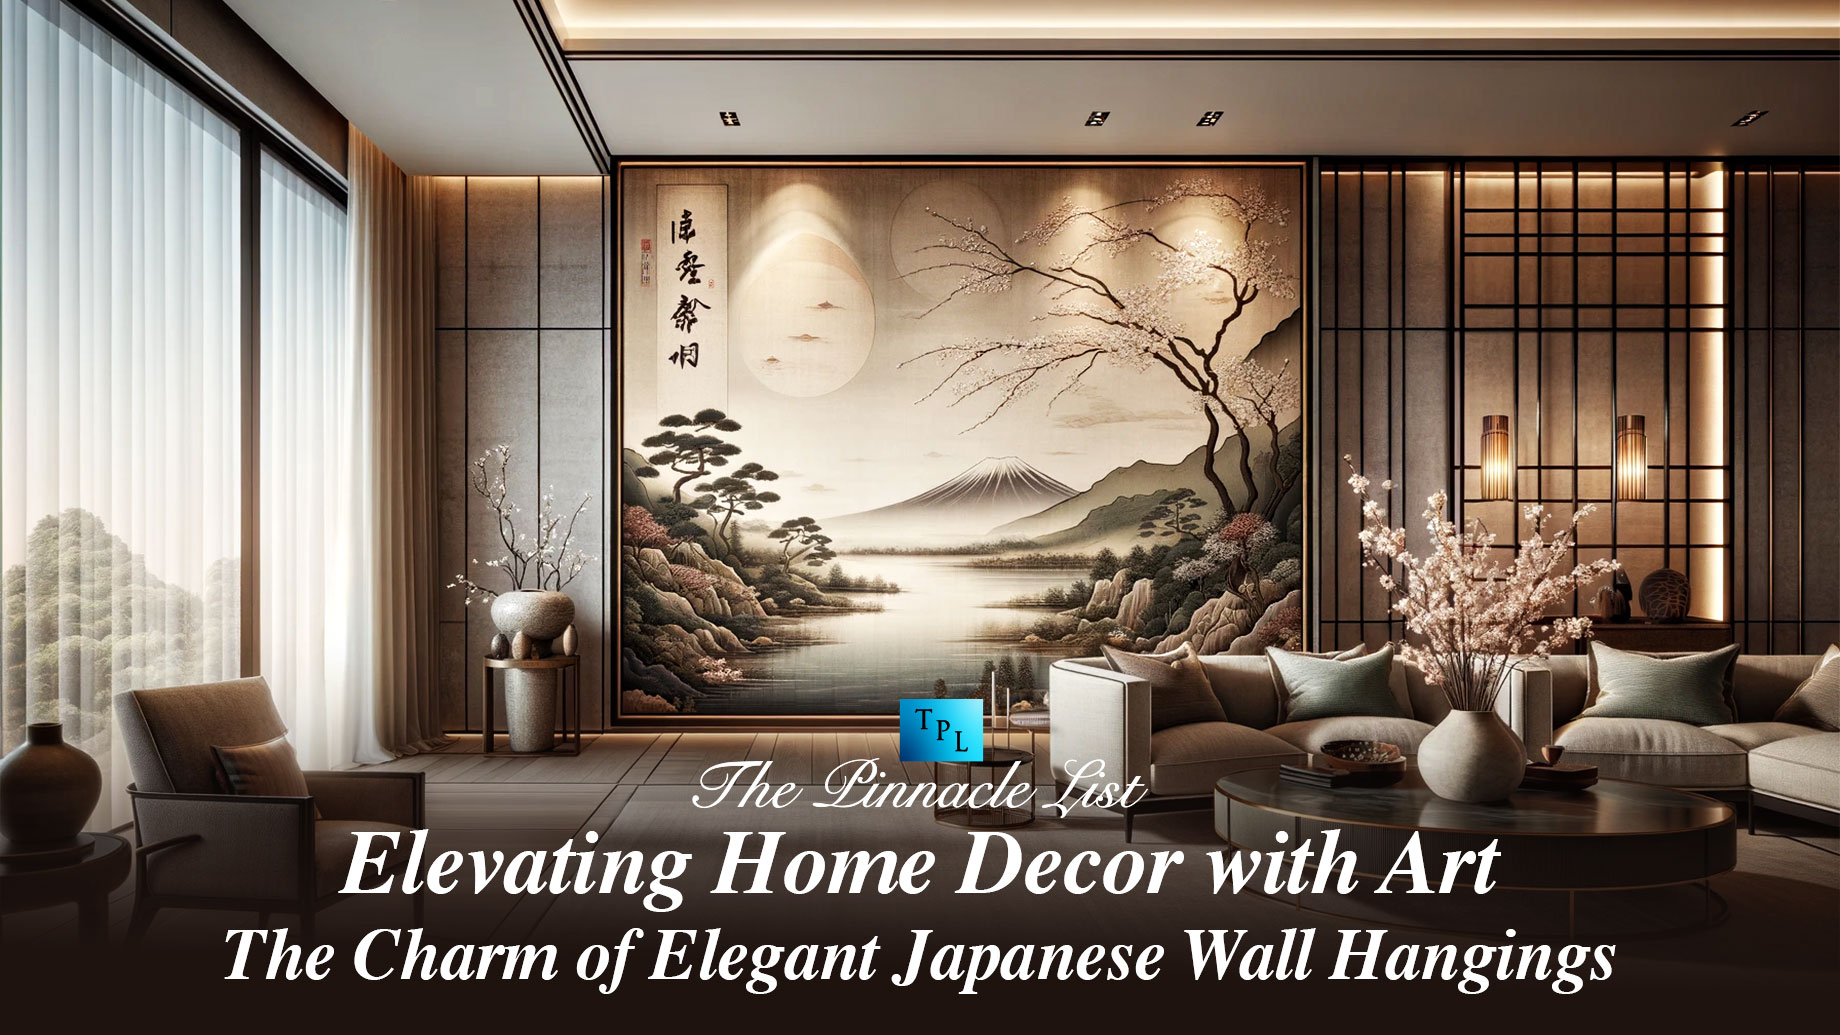 Elevating Home Decor with Art: The Charm of Elegant Japanese Wall Hangings